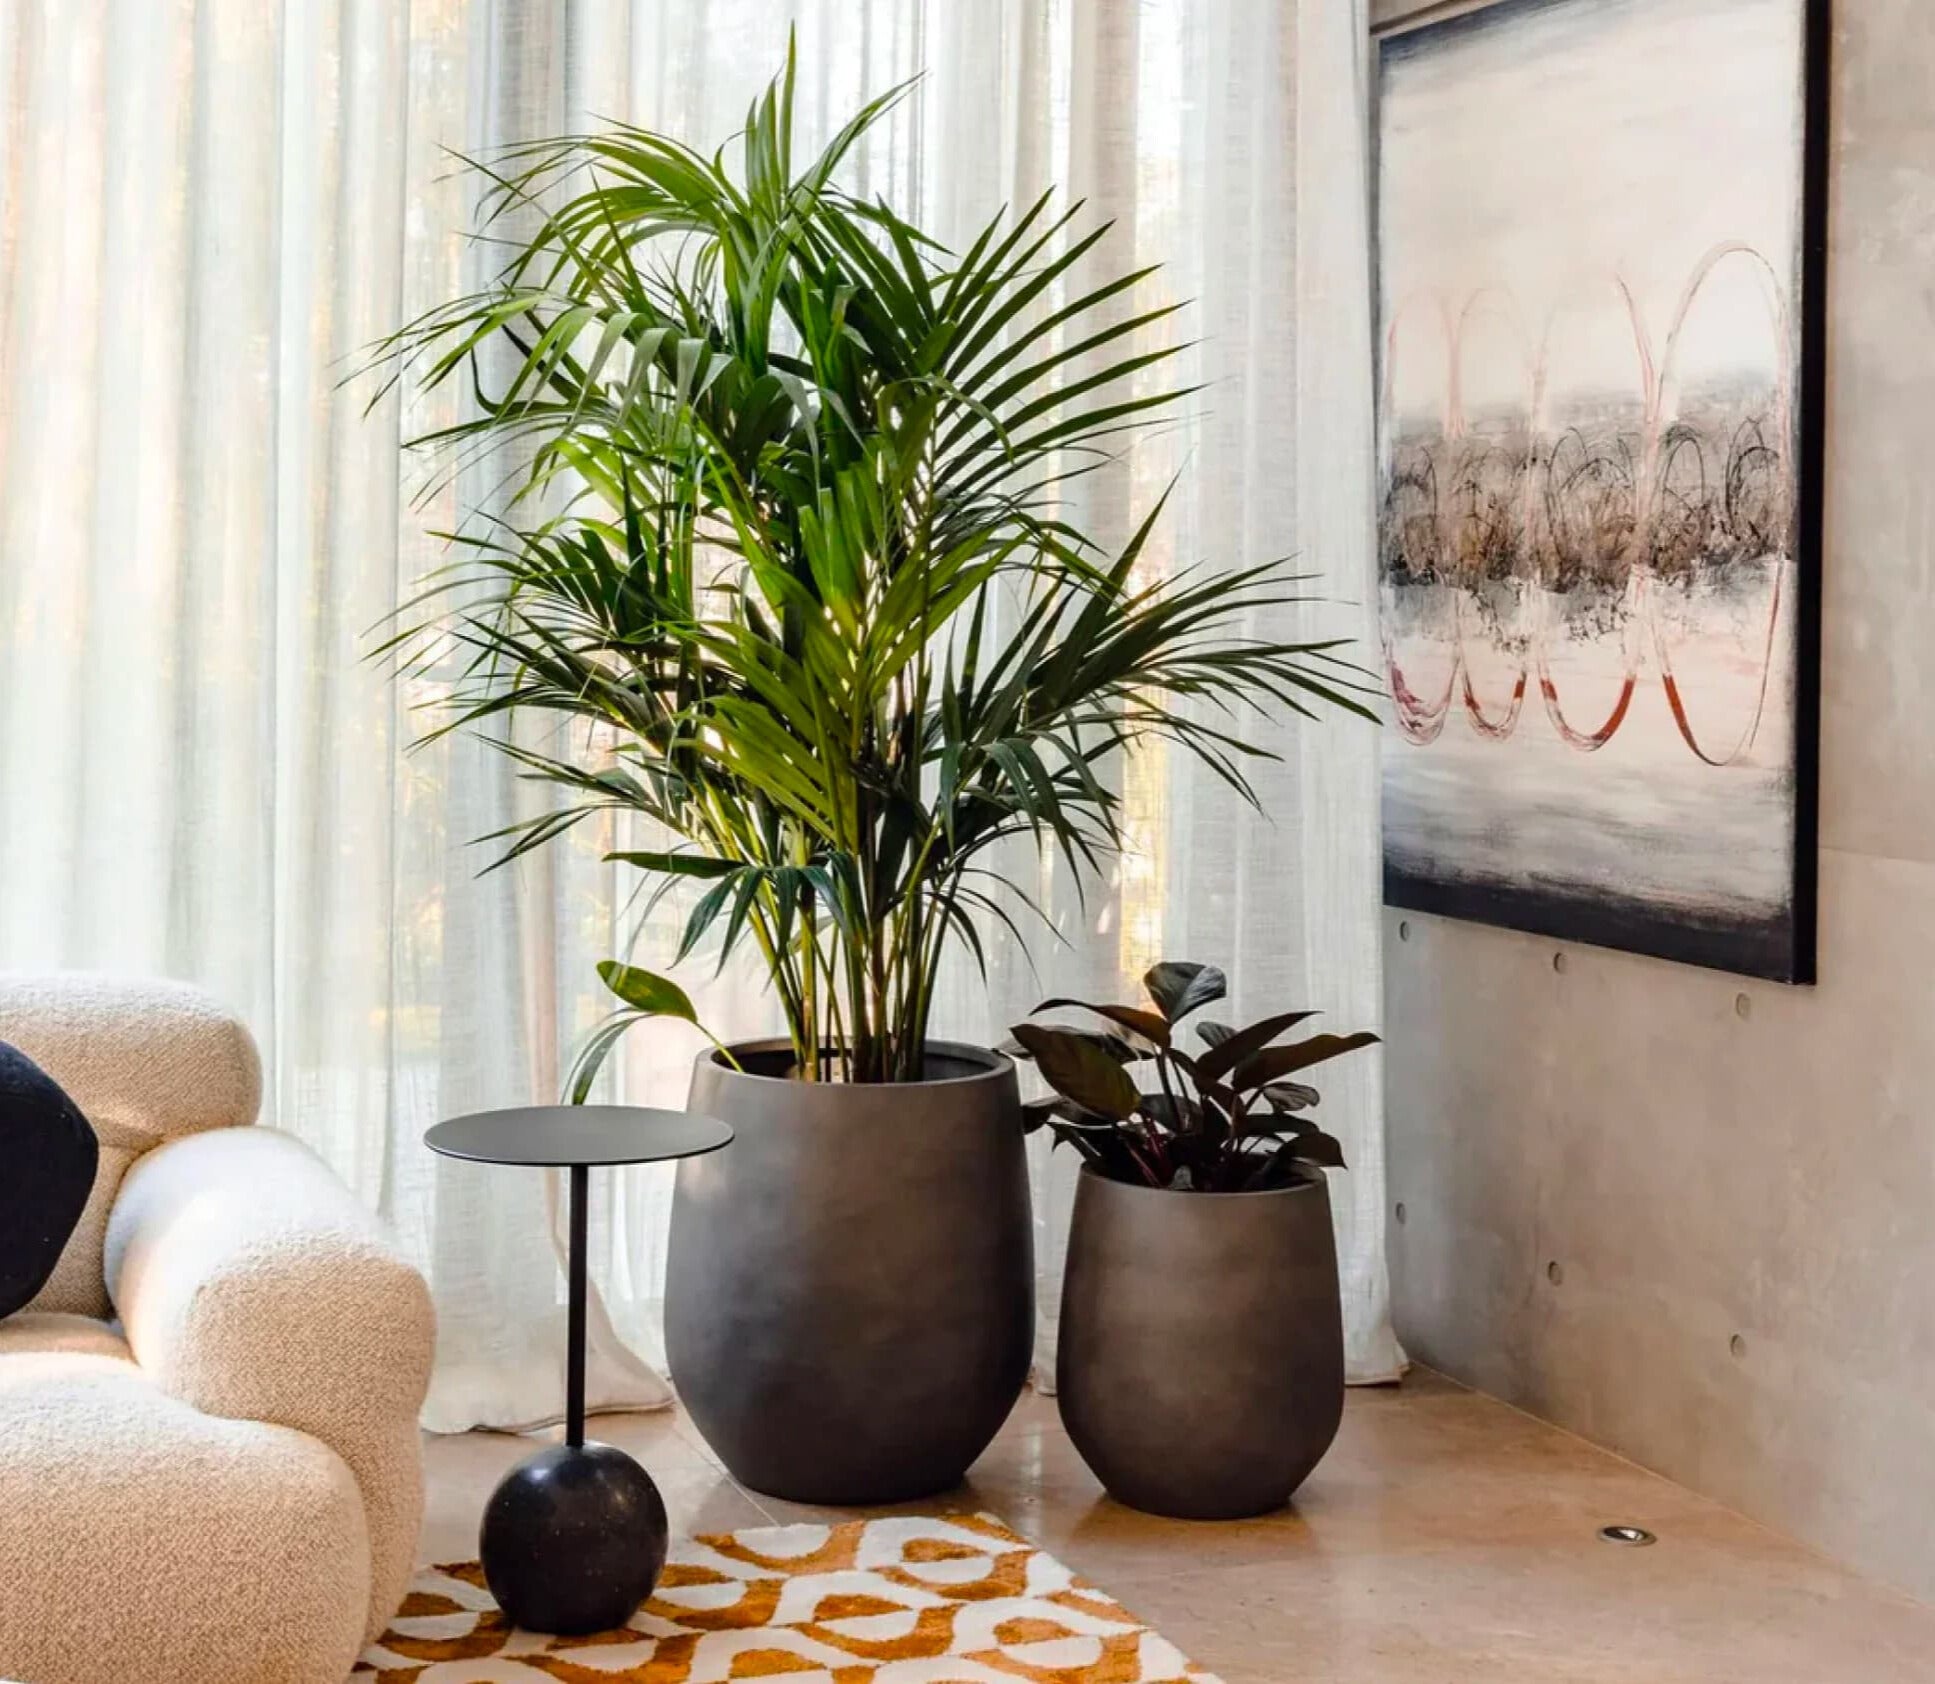 Elegant interior featuring tropical plants in chic matte planters by The Balcony Garden, enhancing the cozy ambiance near sheer curtains and contemporary art